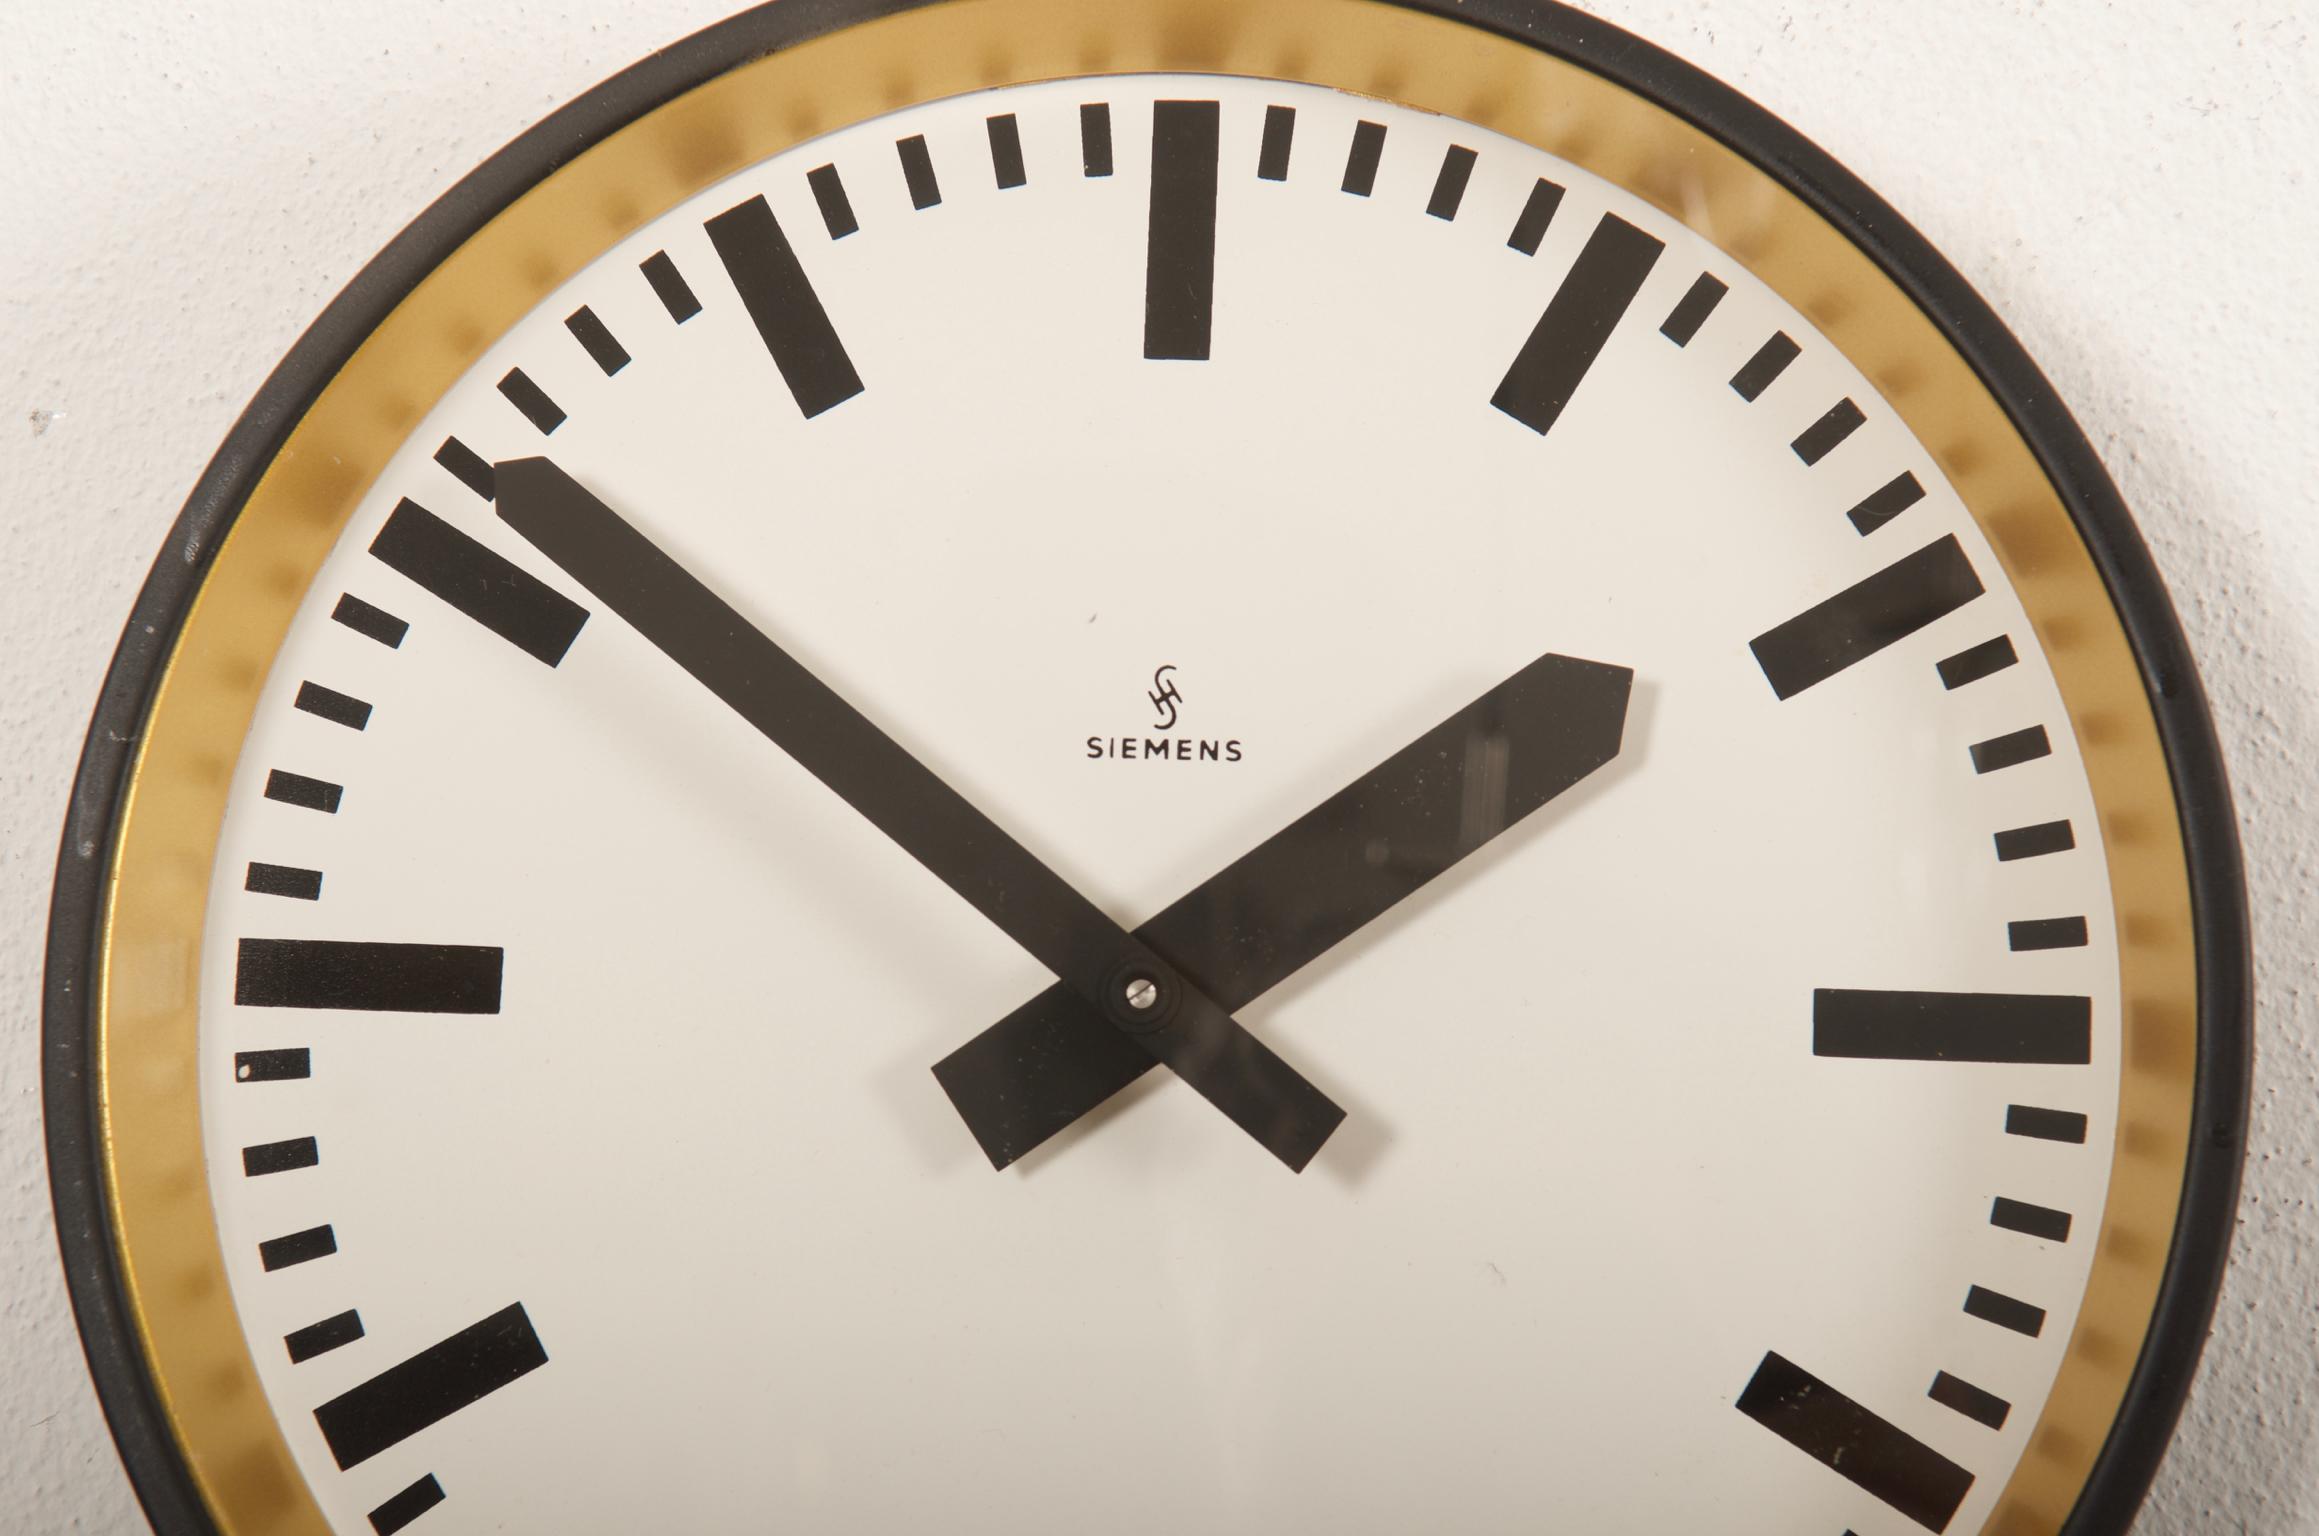 Steel painted clock face made in Germany in the 1950s.
Formerly a slave clock, it is now fitted with a modern quartz movement with a battery.